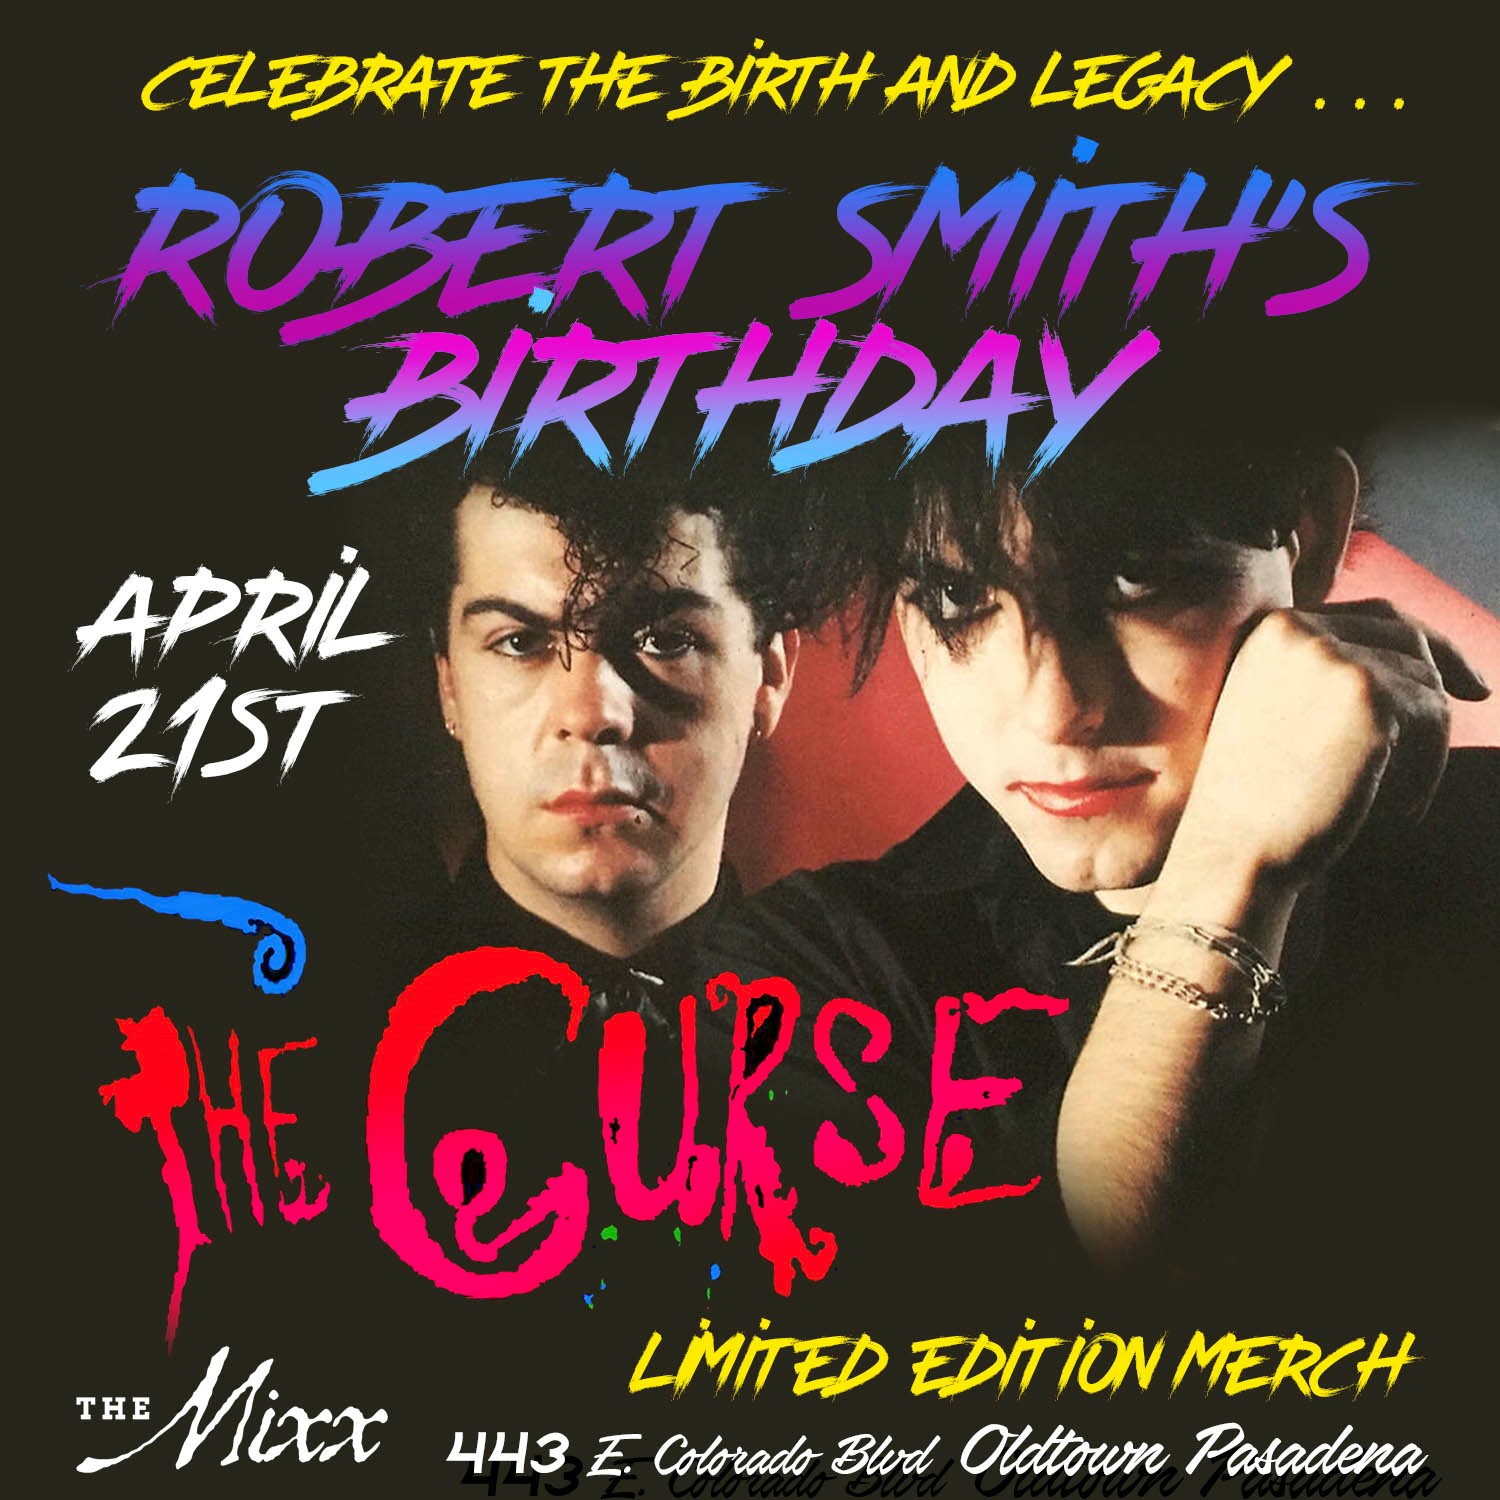 You are currently viewing The Cure’s Robert Smith’s Birthday Tribute Night